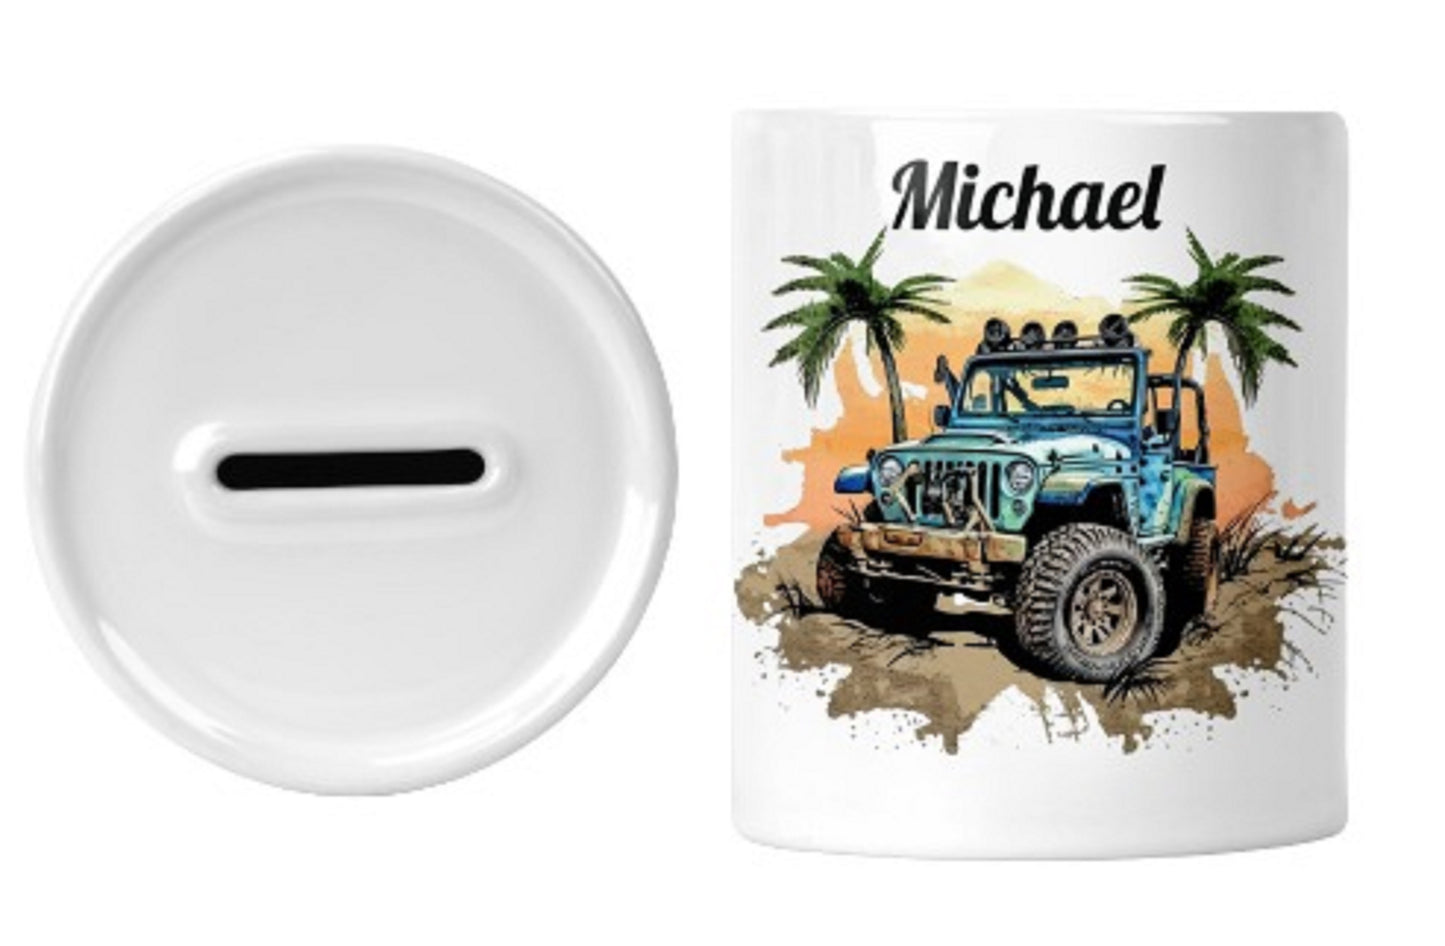  Personalised or Jeep Fund Reusable Money Box by Free Spirit Accessories sold by Free Spirit Accessories